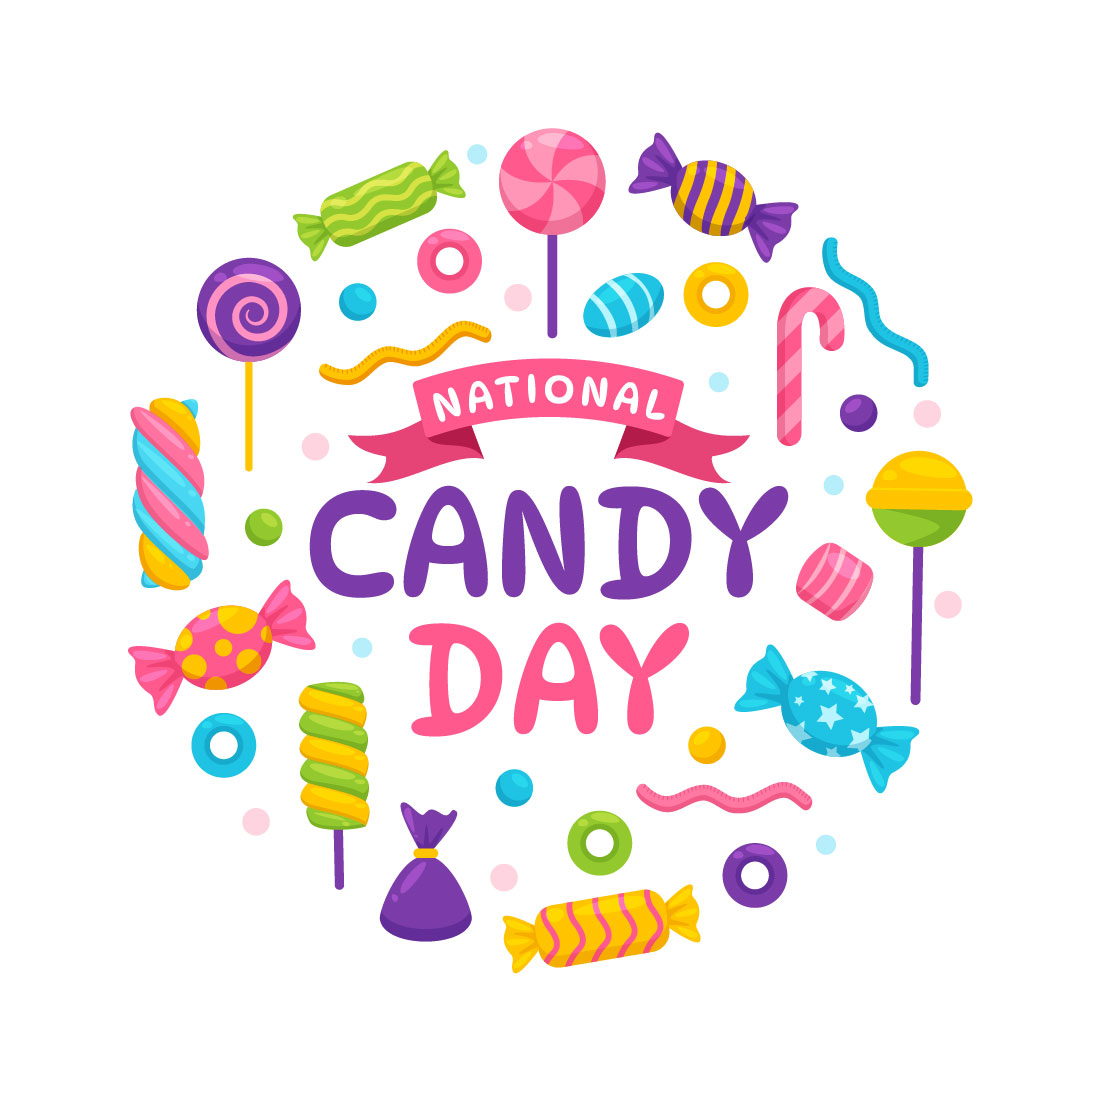 12 National Candy Day Illustration preview image.